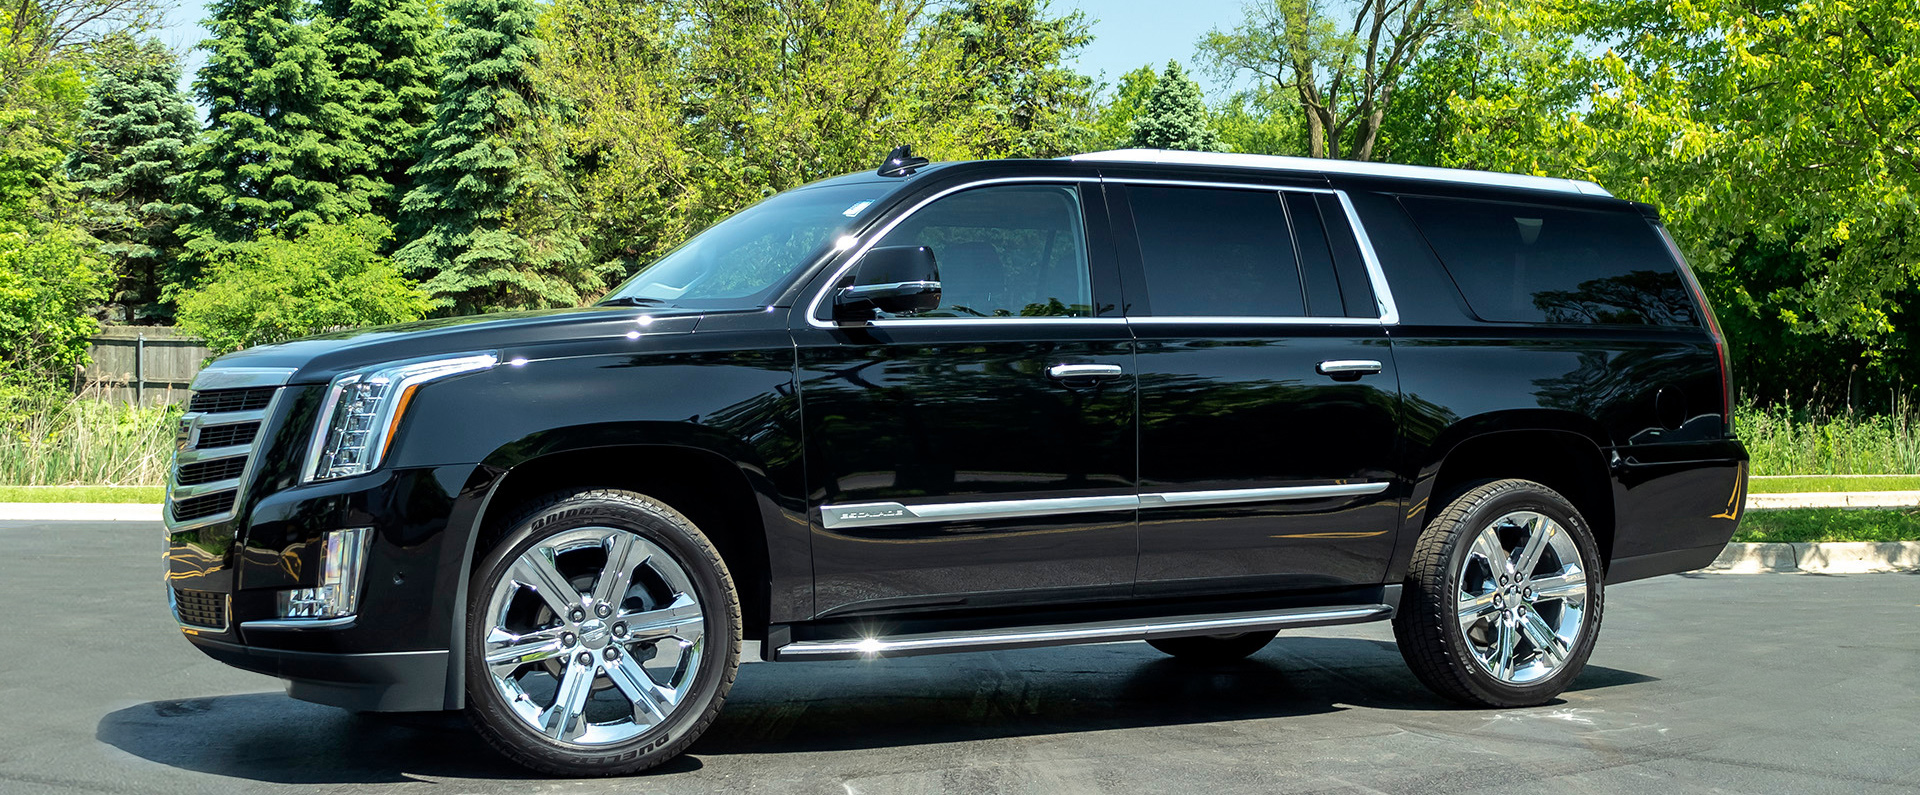 New Haven Limo SUV